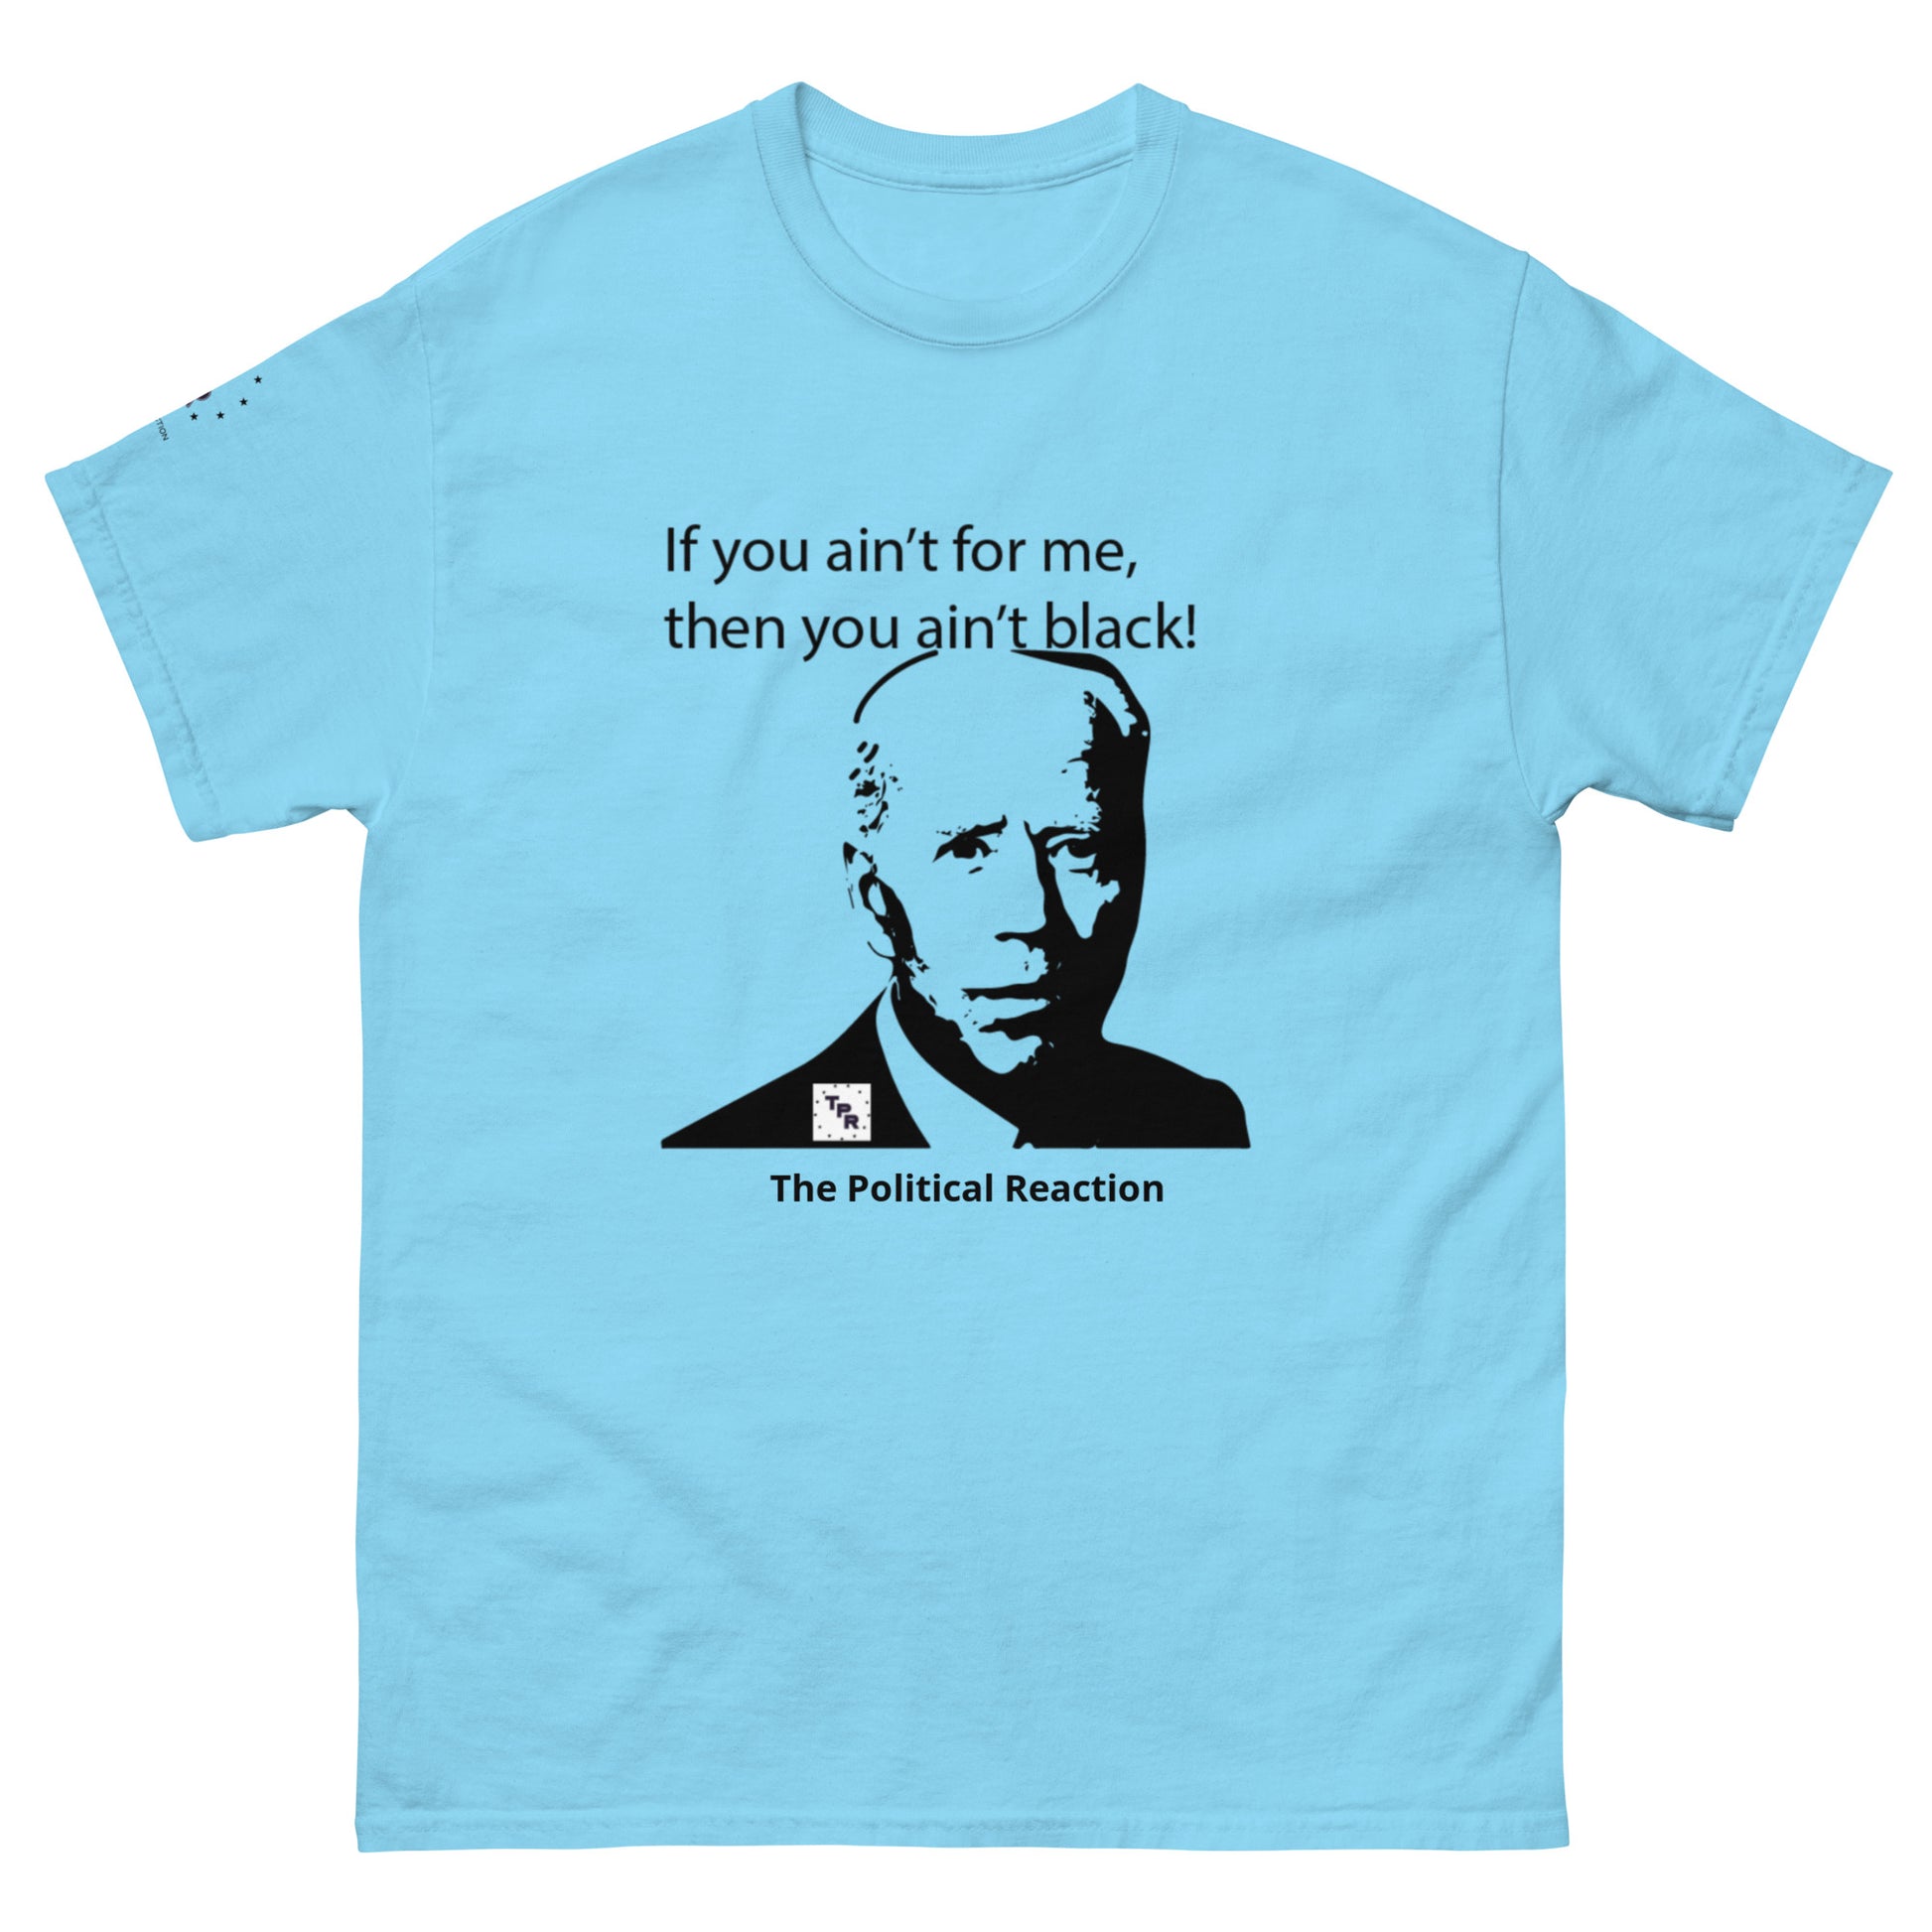 Presidential-Collection-aint-for-me-tee-shirt-Sky-blue-front